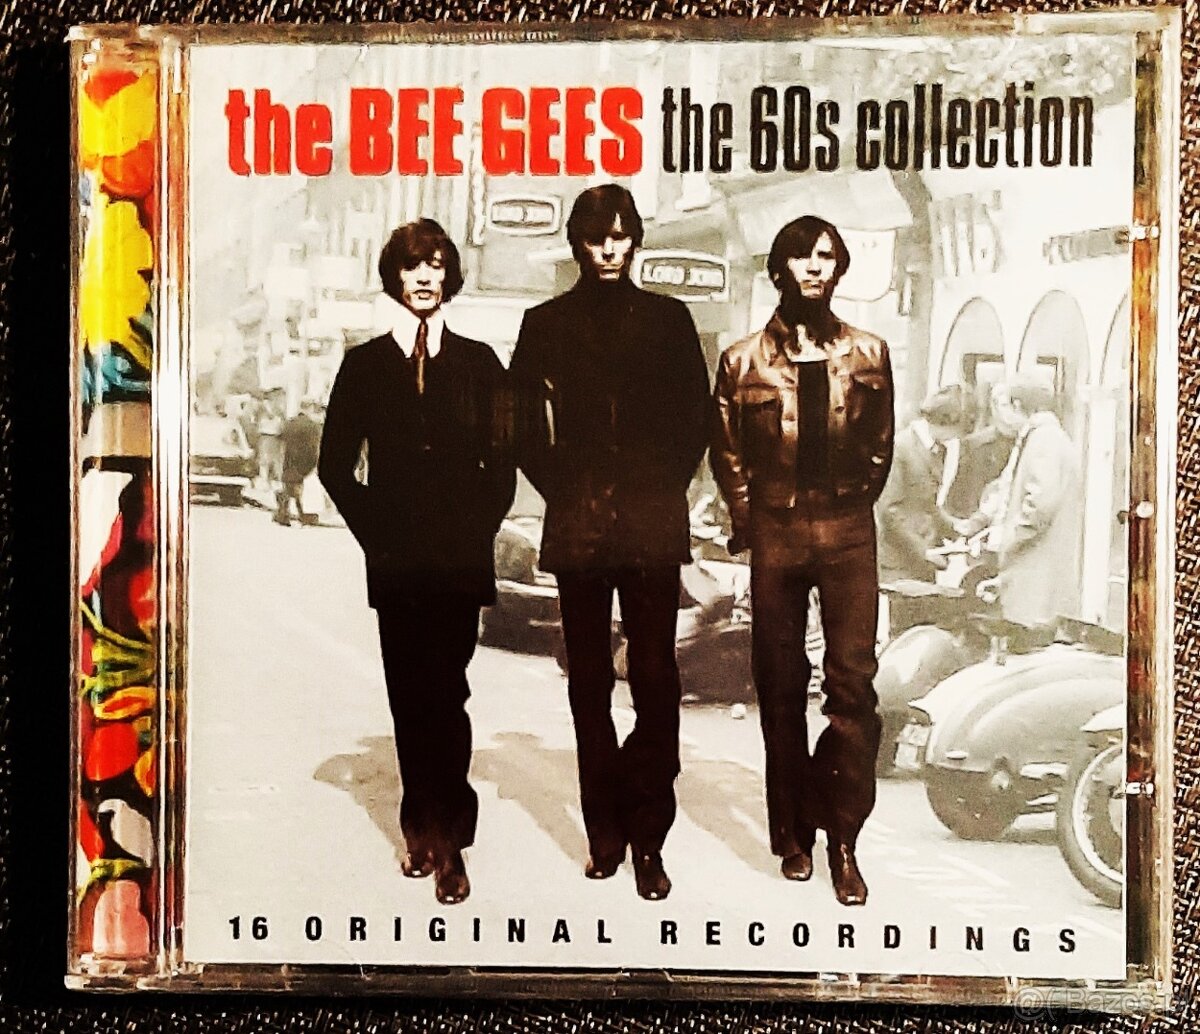 Polecam Album CD  BEE GEES Album The 60 Collection CD